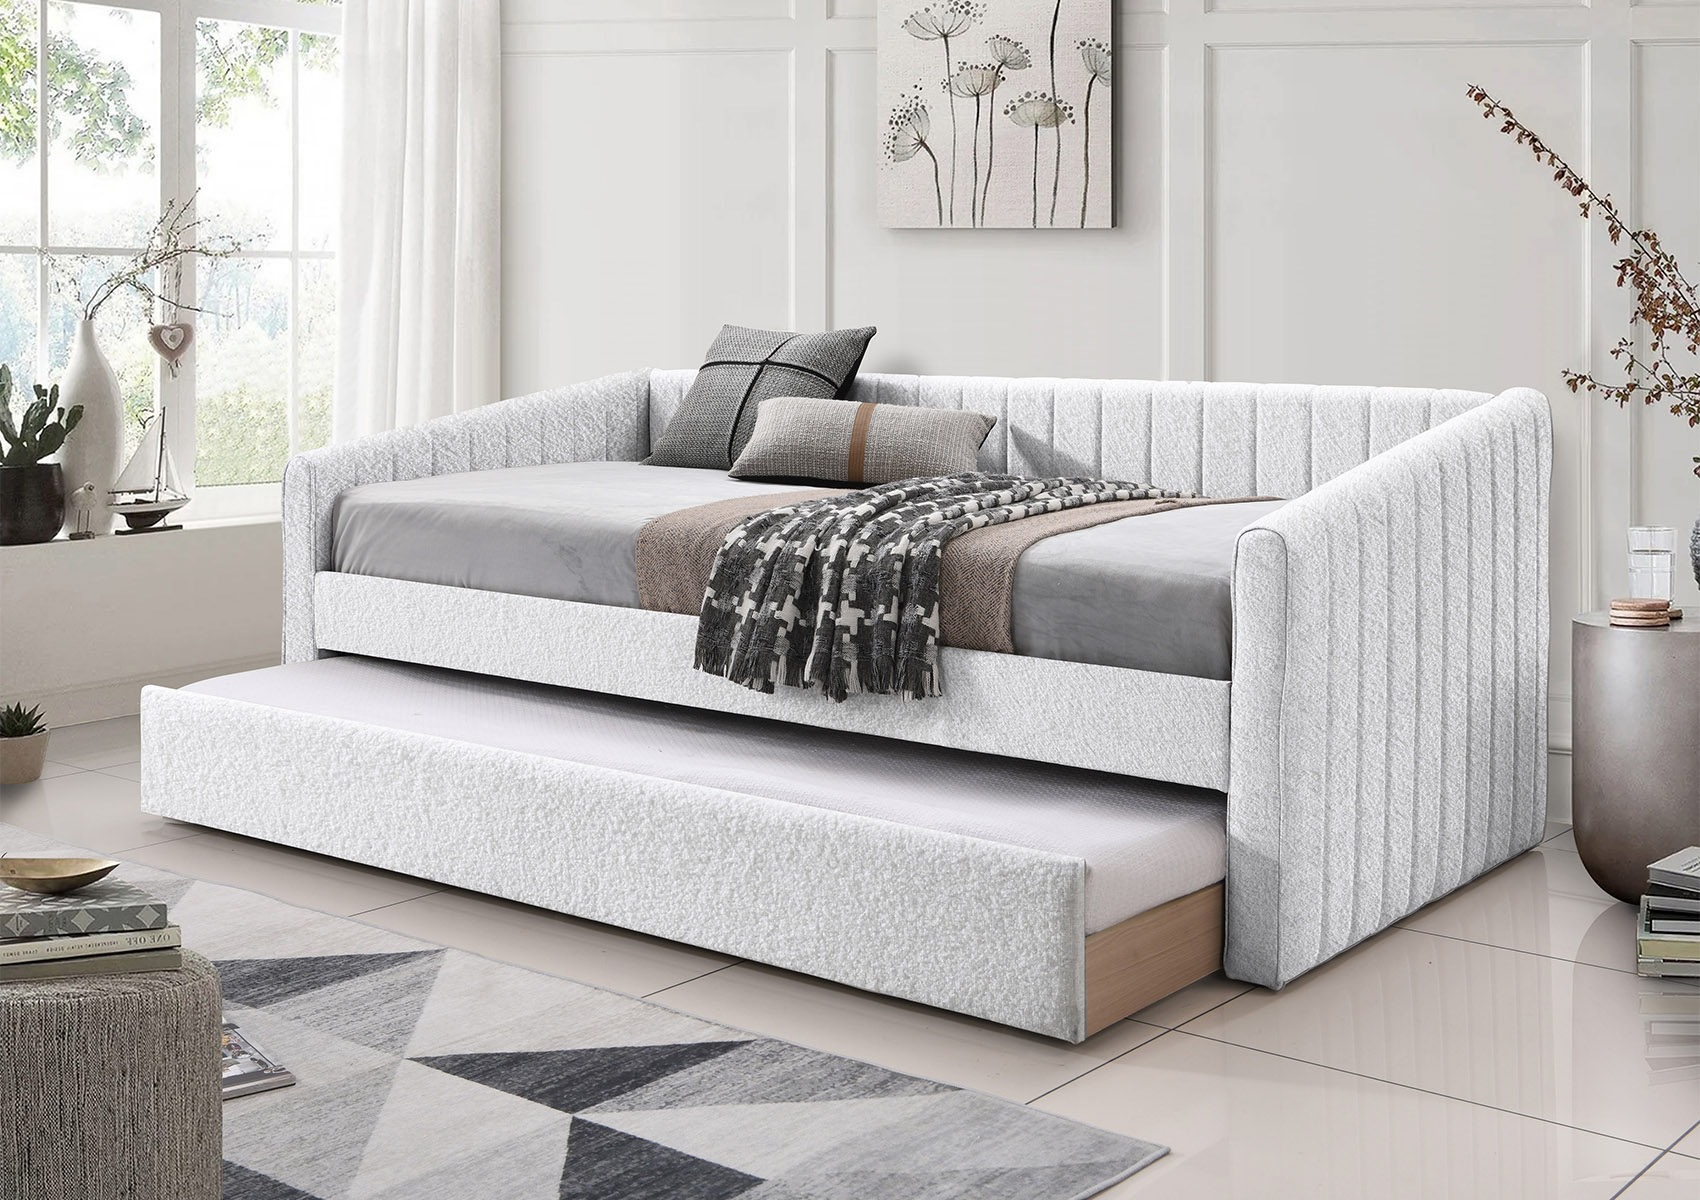 View Sanderson Cream Upholstered Day Bed Including Underbed Time4Sleep information